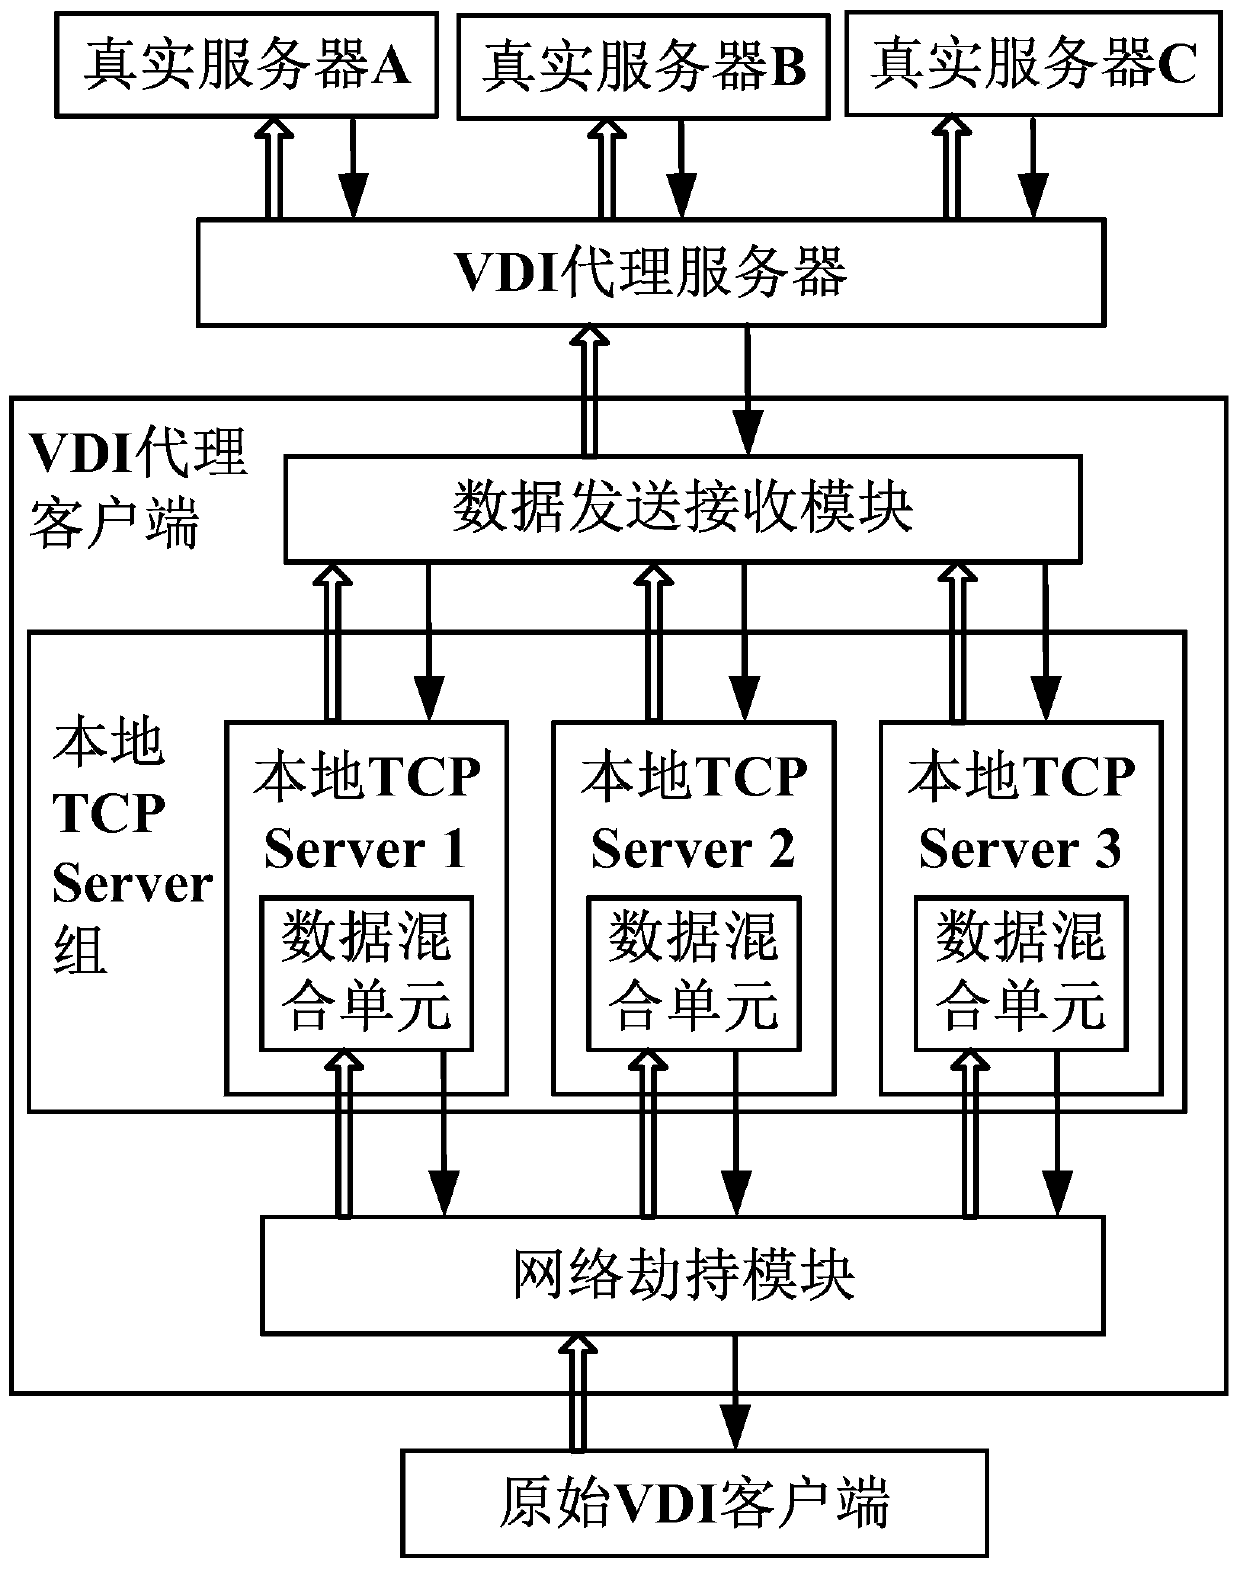 Single-channel VDI proxy service system and implementation method